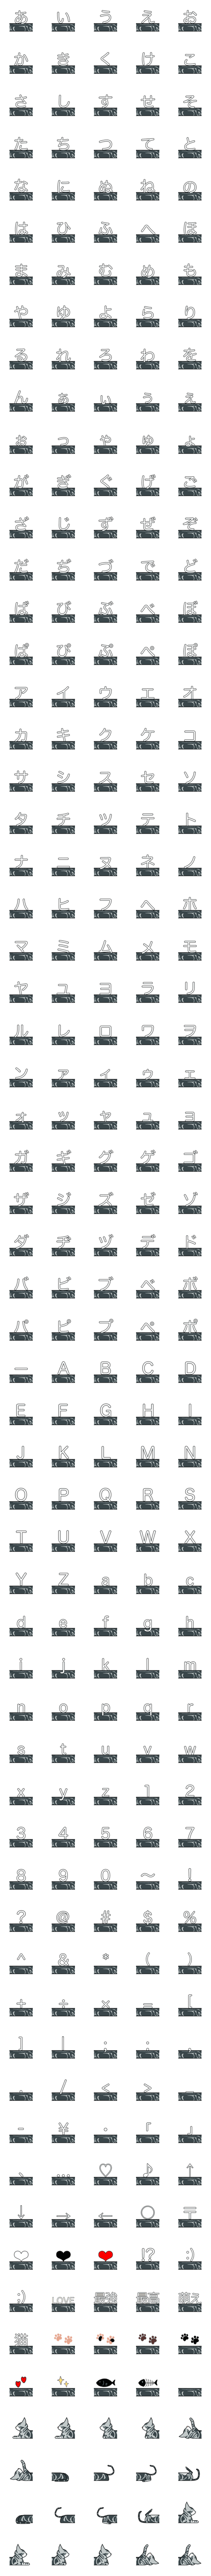 [LINE絵文字]繋がる猫の絵文字 Vol.1の画像一覧